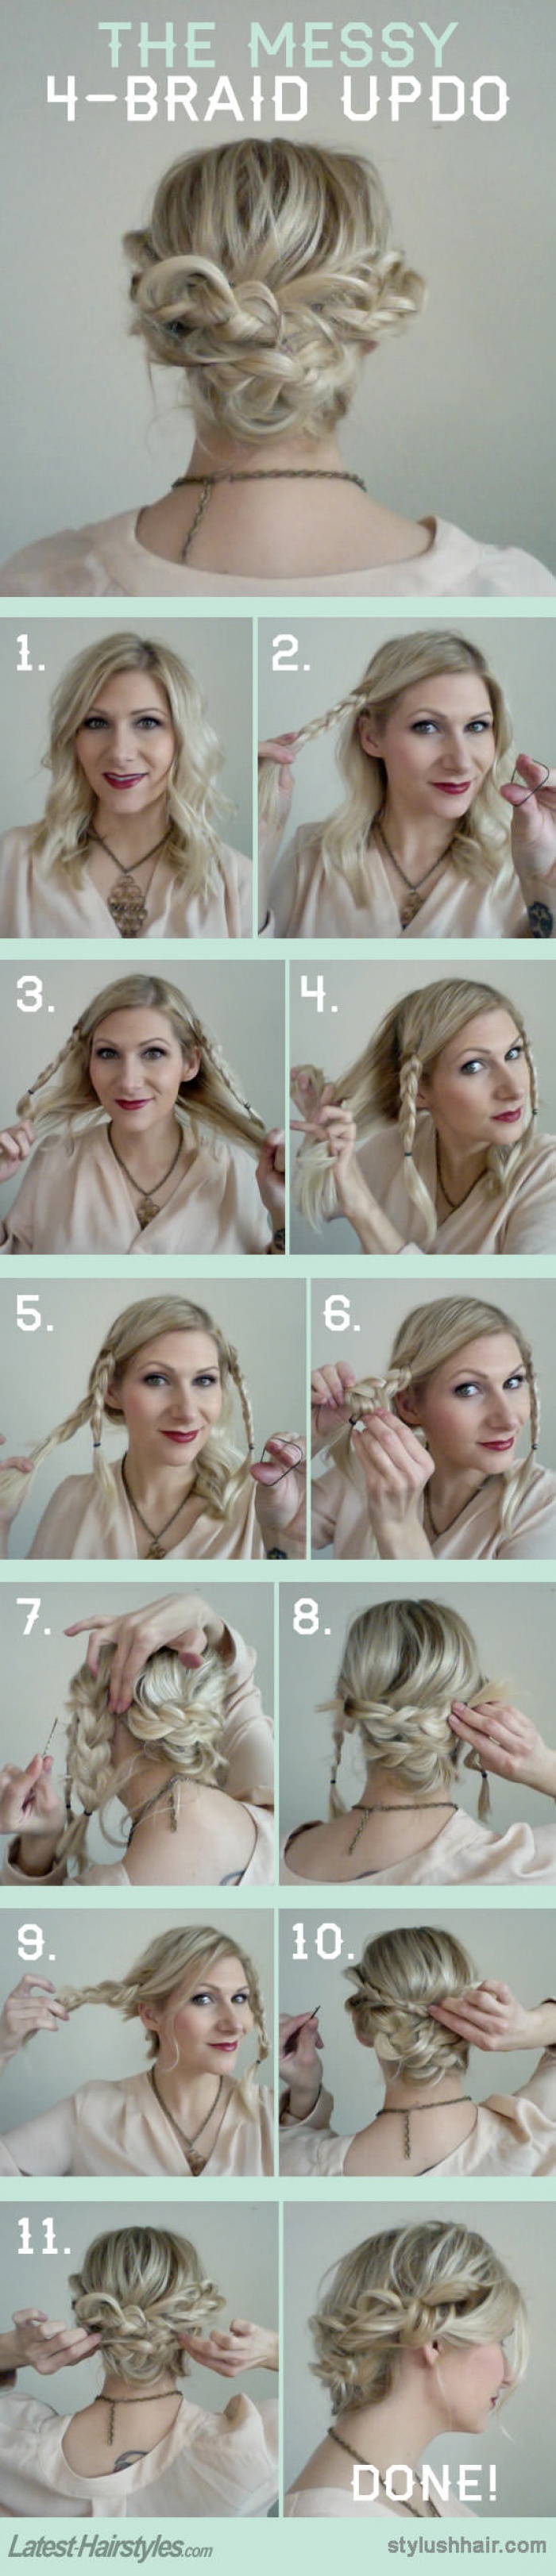 Messy Braided Updo Hairstyle Tutorial